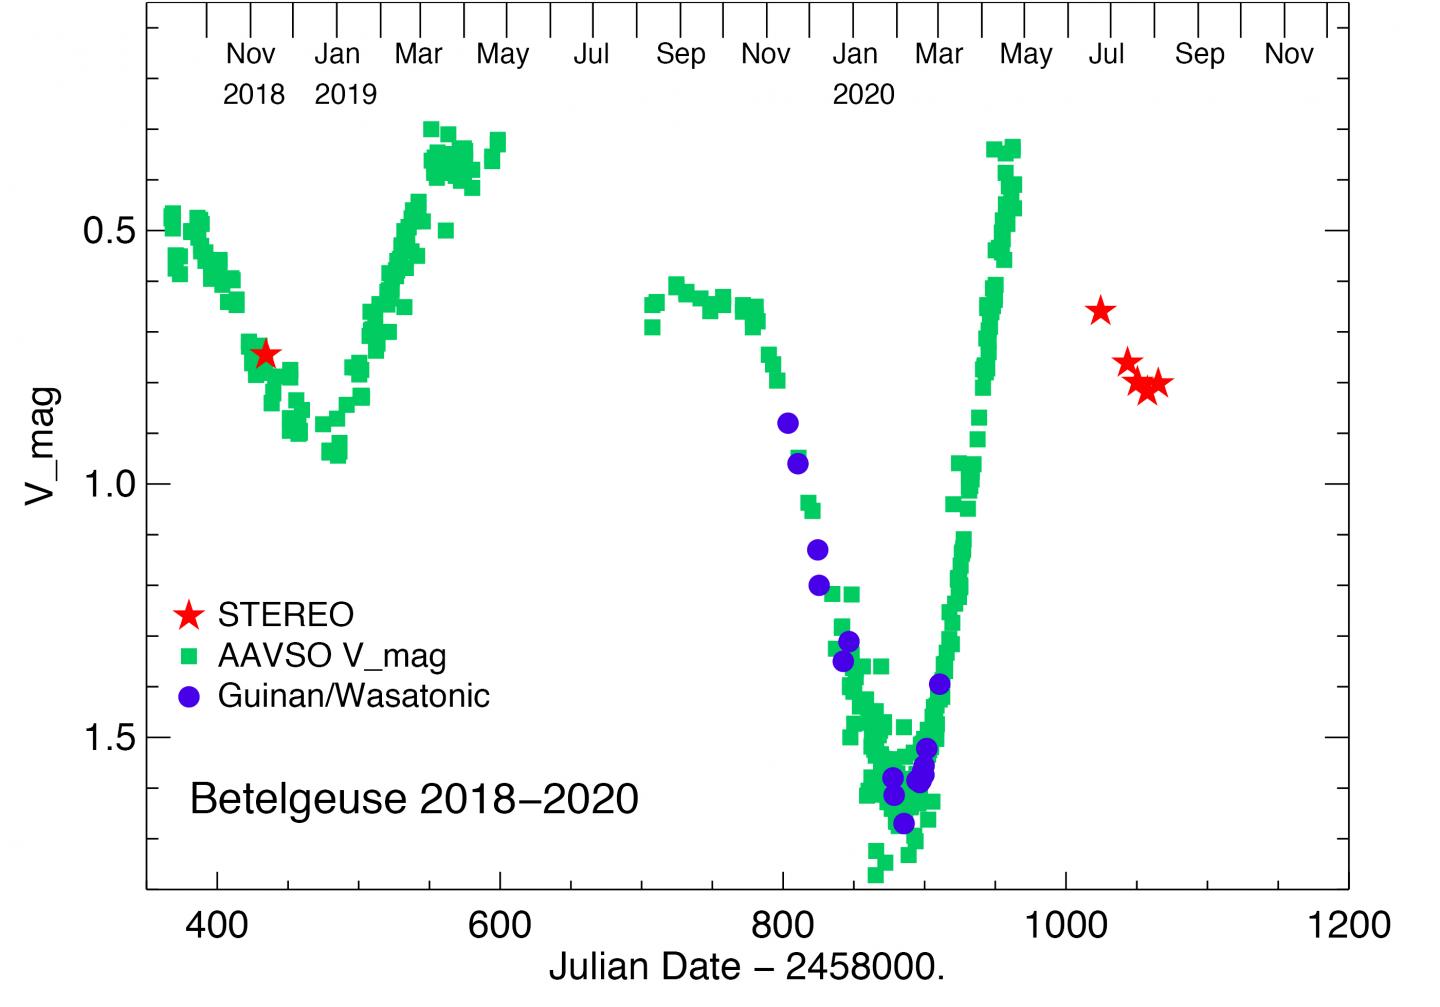 Chart of Betelgeuse brightness over time